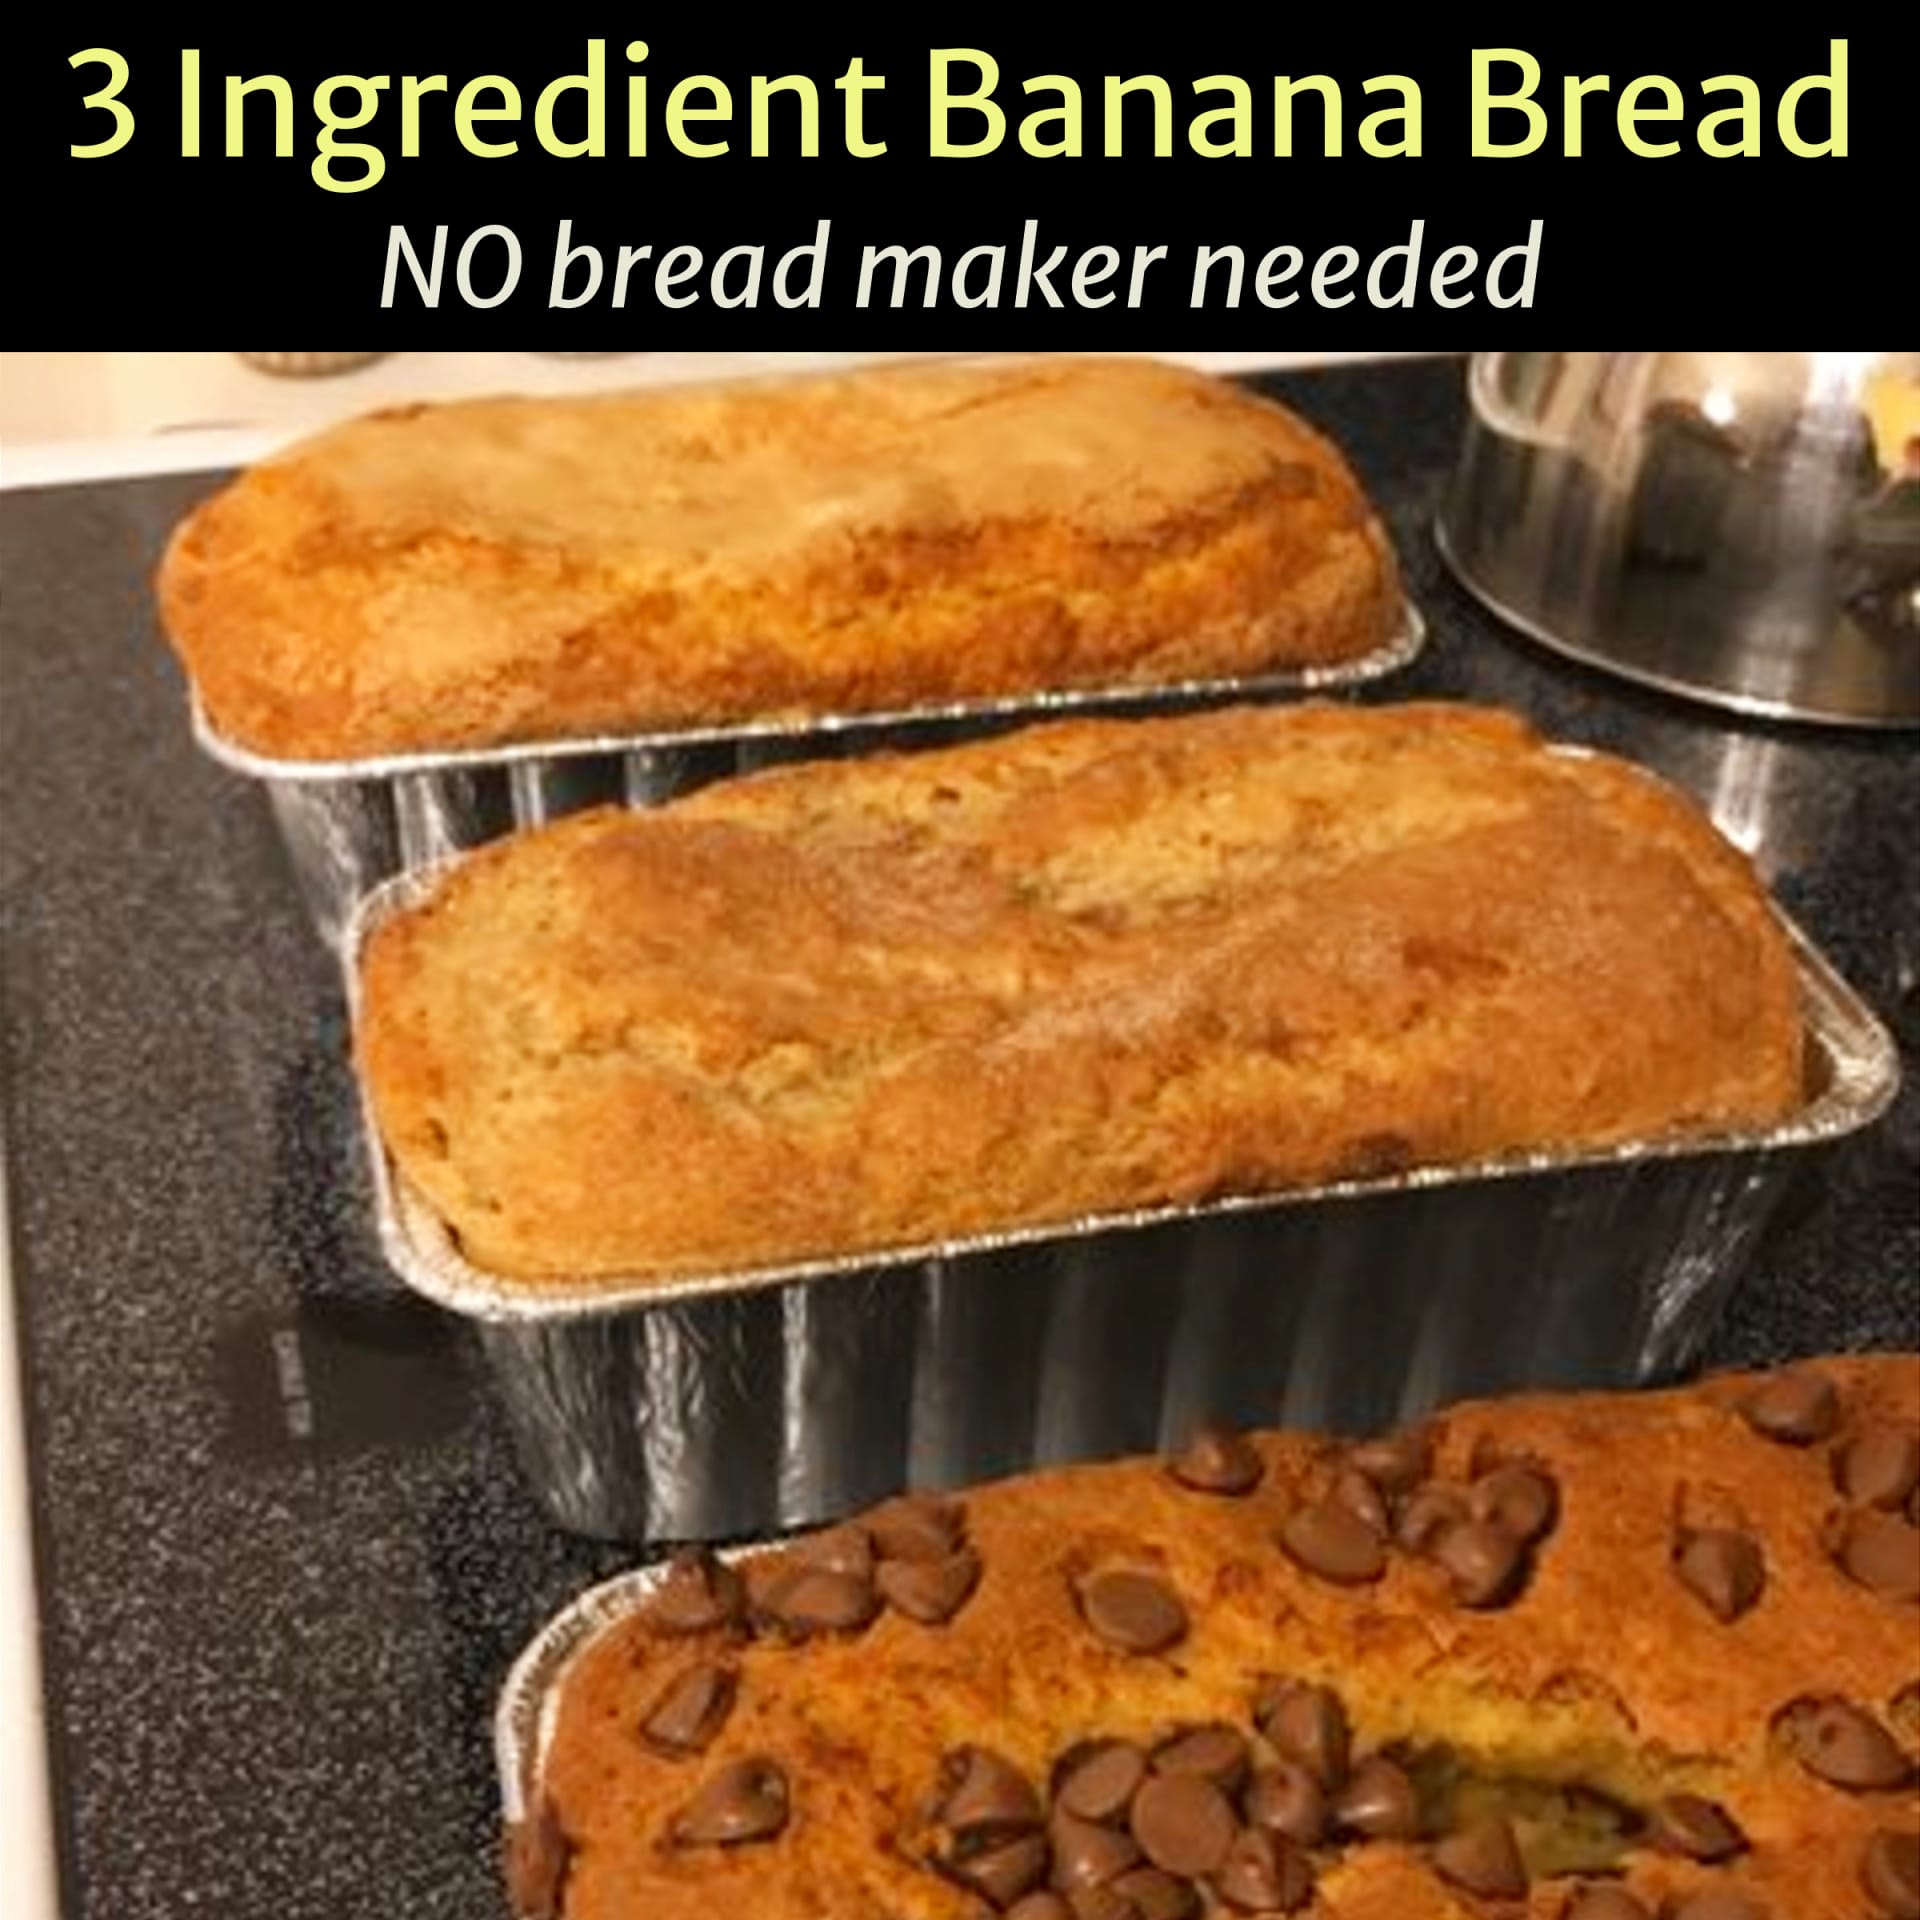 3 ingredient banana bread - TWO easy 3 ingredient recipes one WITHOUT cake mix and one WITH cake mix - so easy and SO delicious